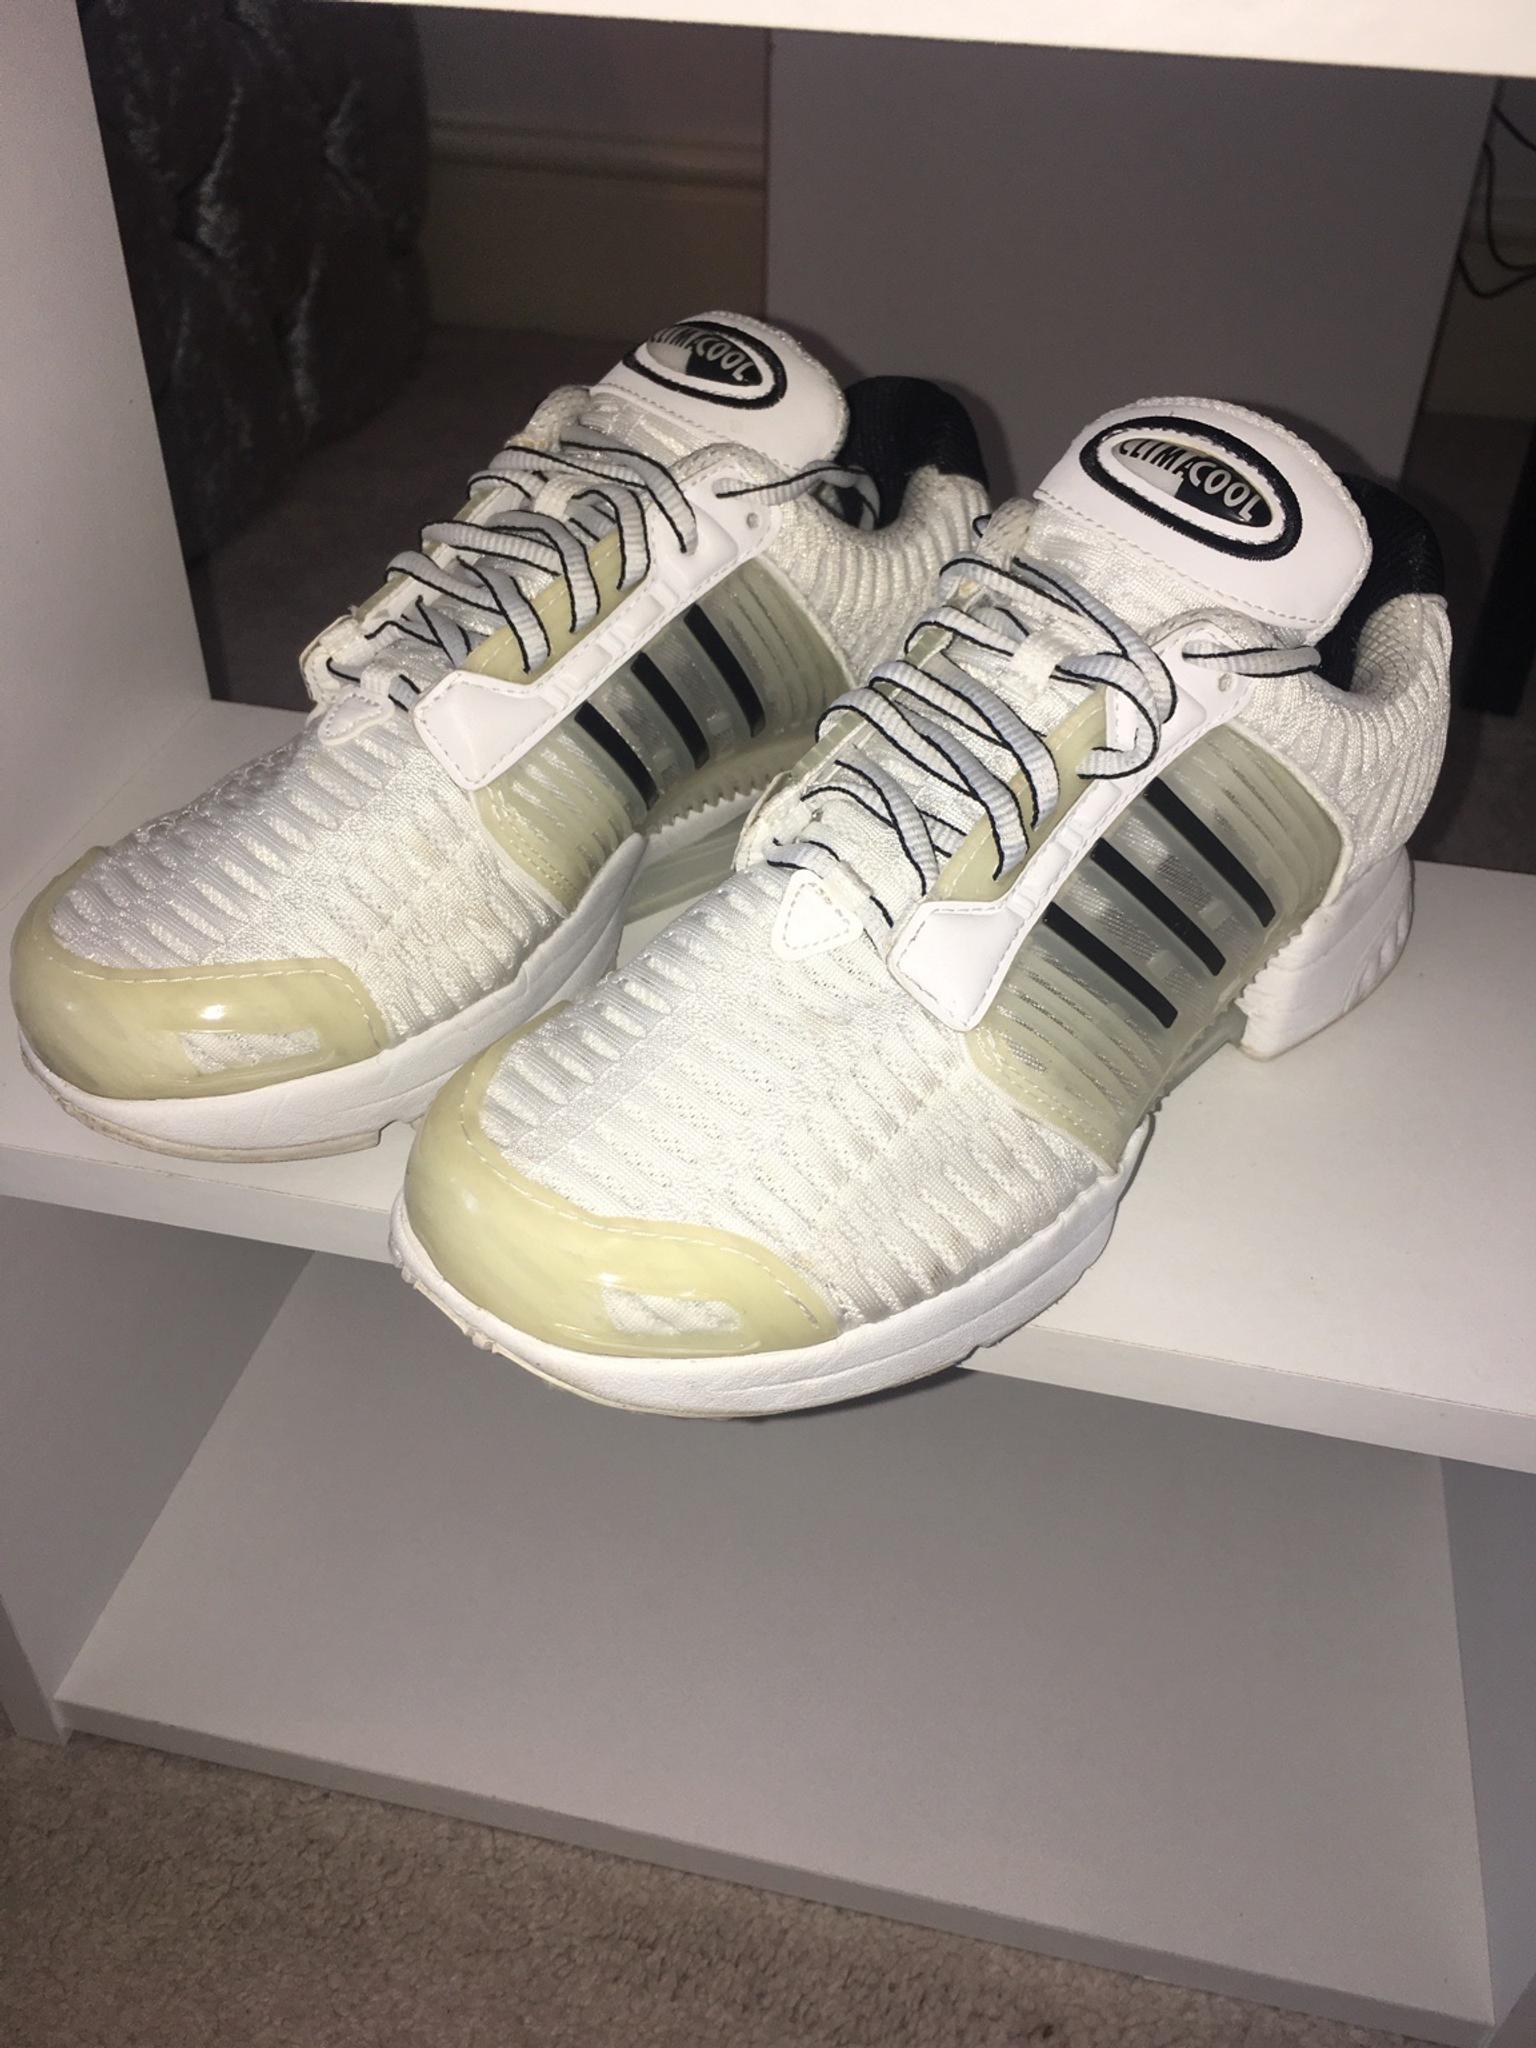 Black and white Adidas climacool size 5.5 in St Helens for £25.00 for sale  | Shpock